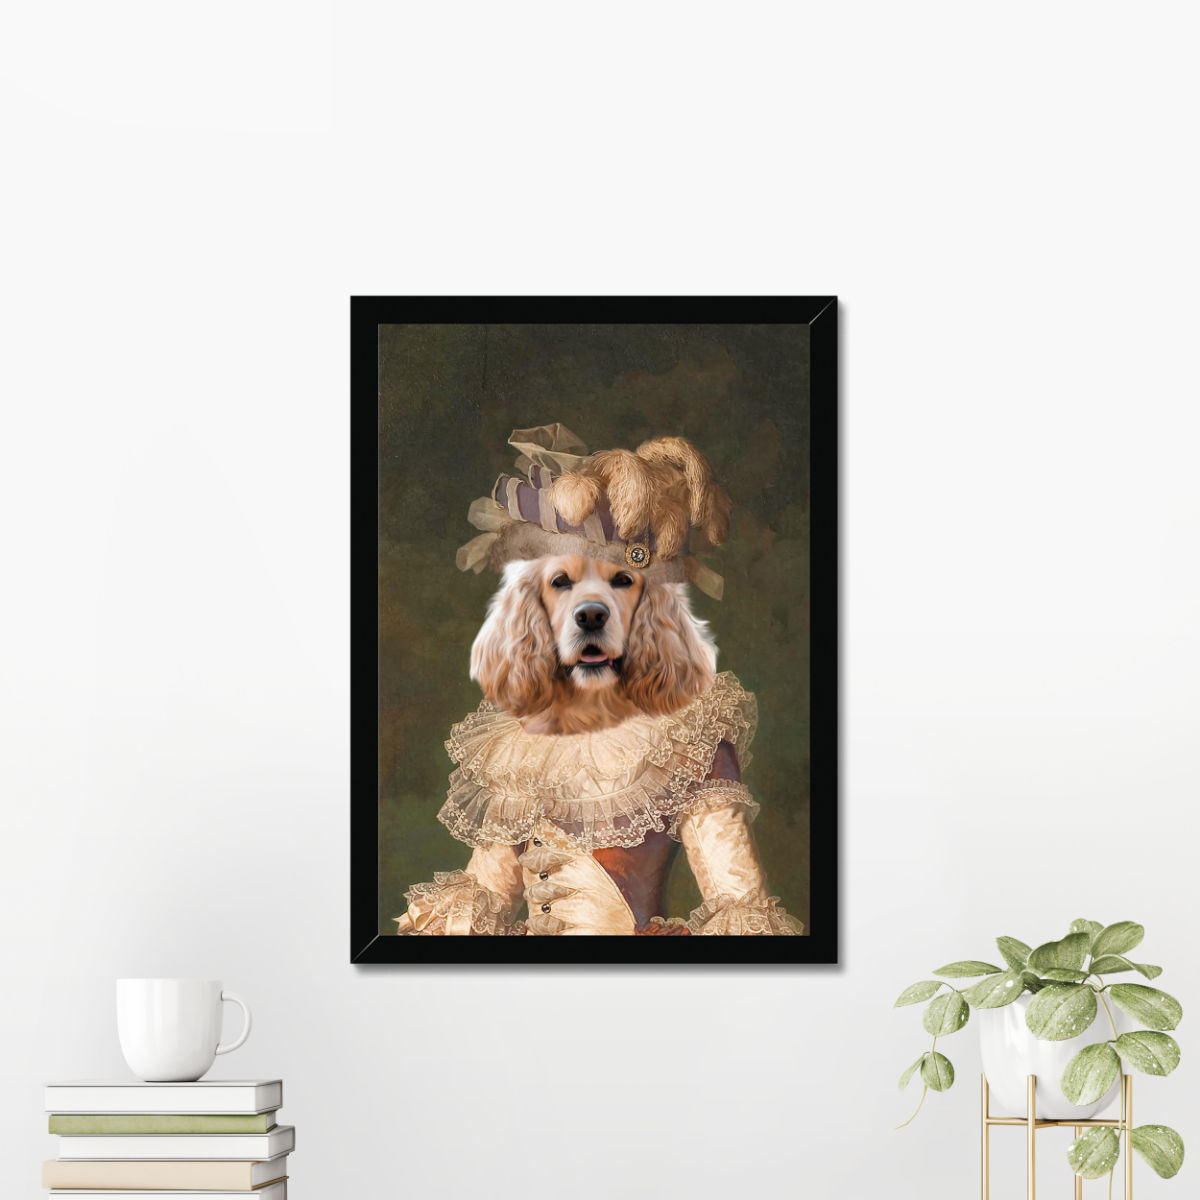 Marie Antoinette: Custom Digital Pet Portrait, Paw & Glory,paw and glory, paintings of pets from photos, custom dog painting, pet portraits, funny dog paintings, for pet portraits, painting of your dog,